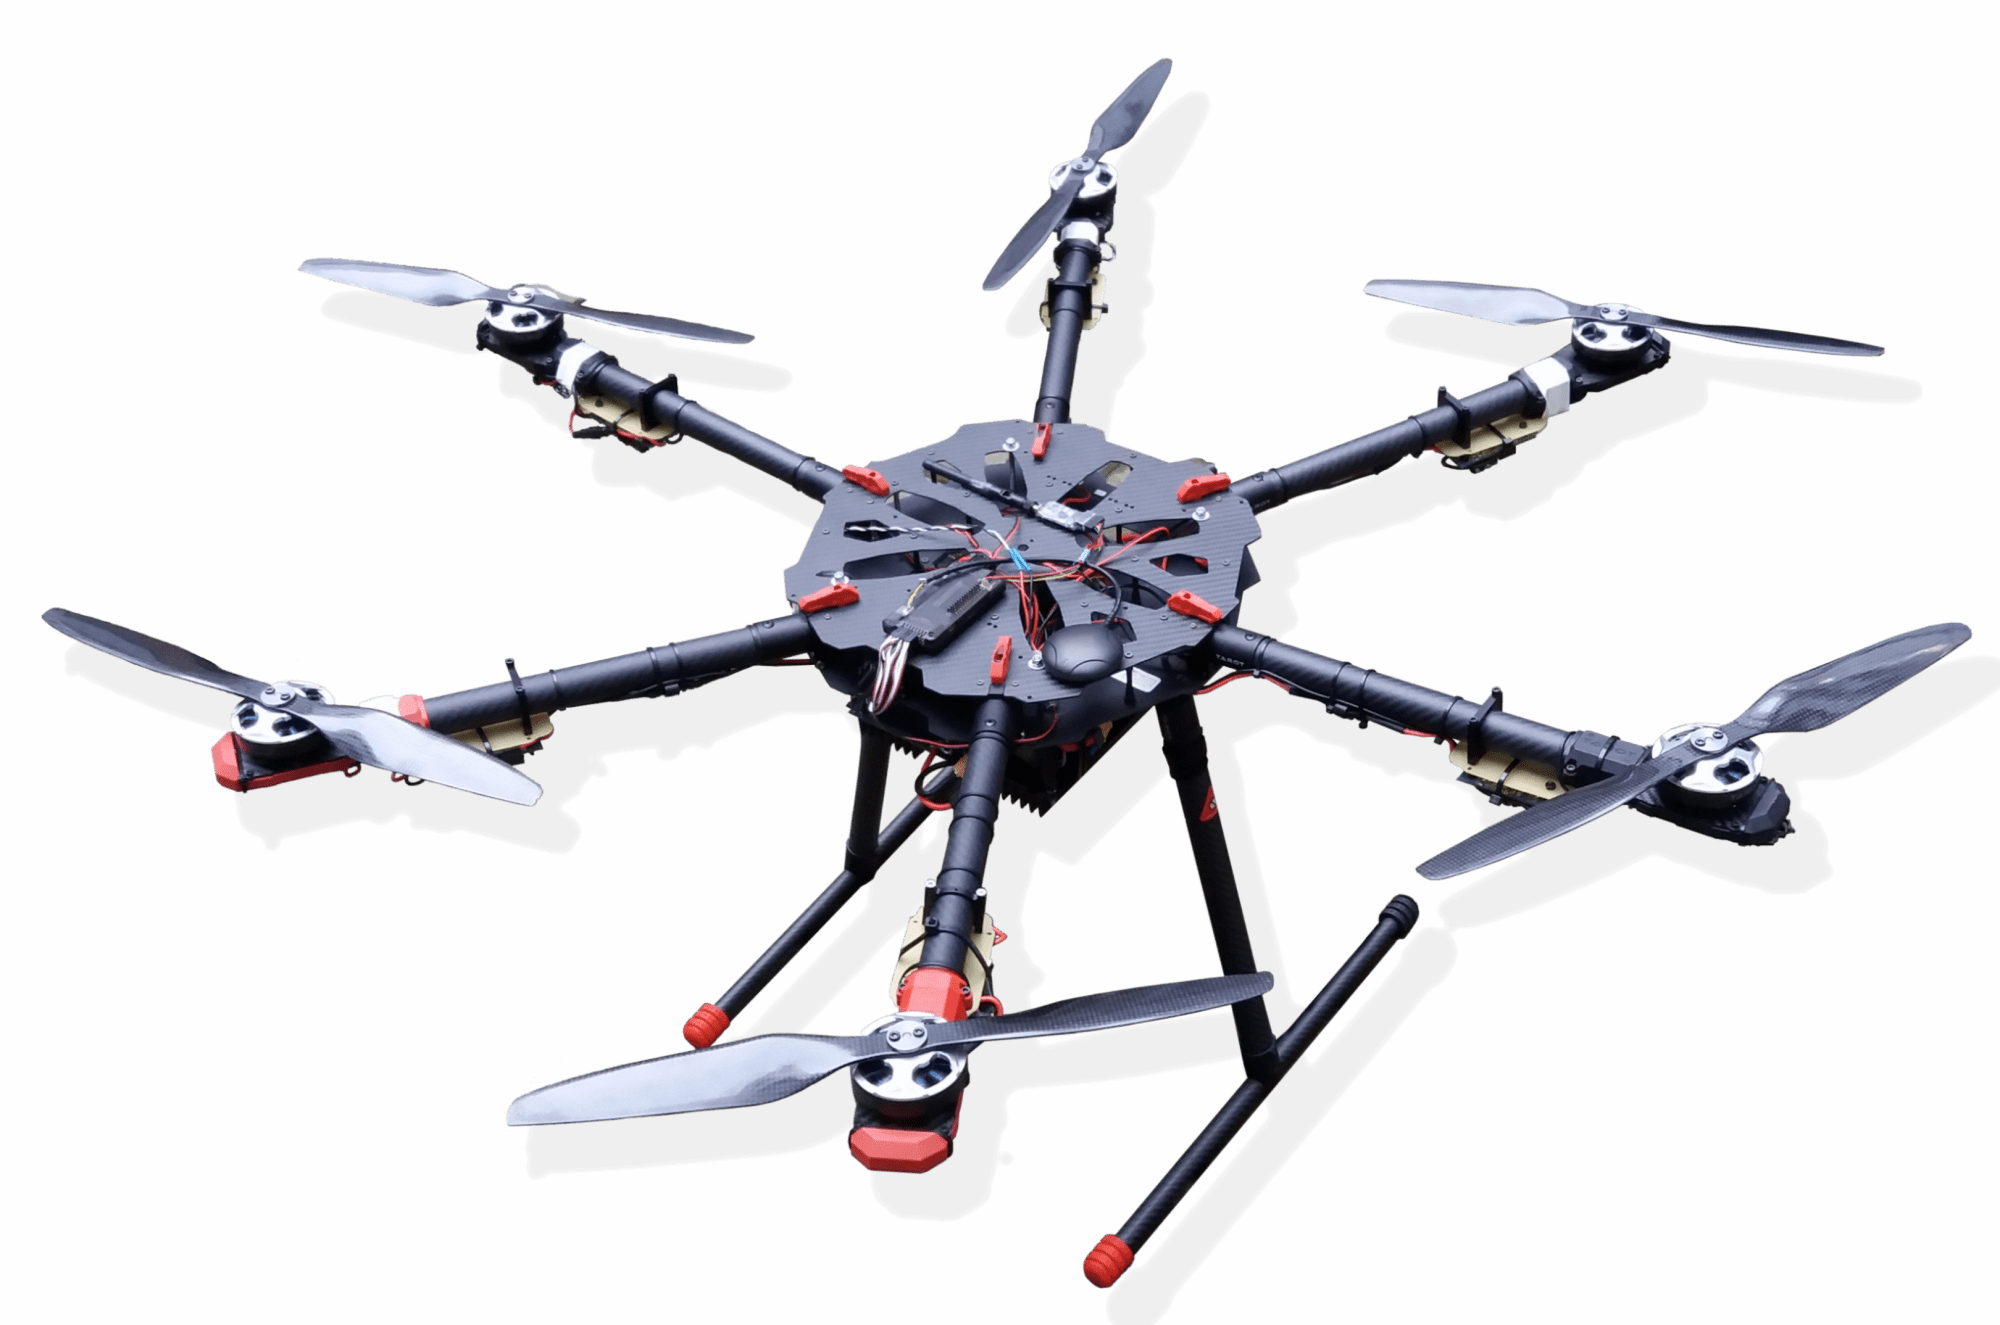 http://tethereddrone.eu/wp-content/uploads/2019/08/dron.png